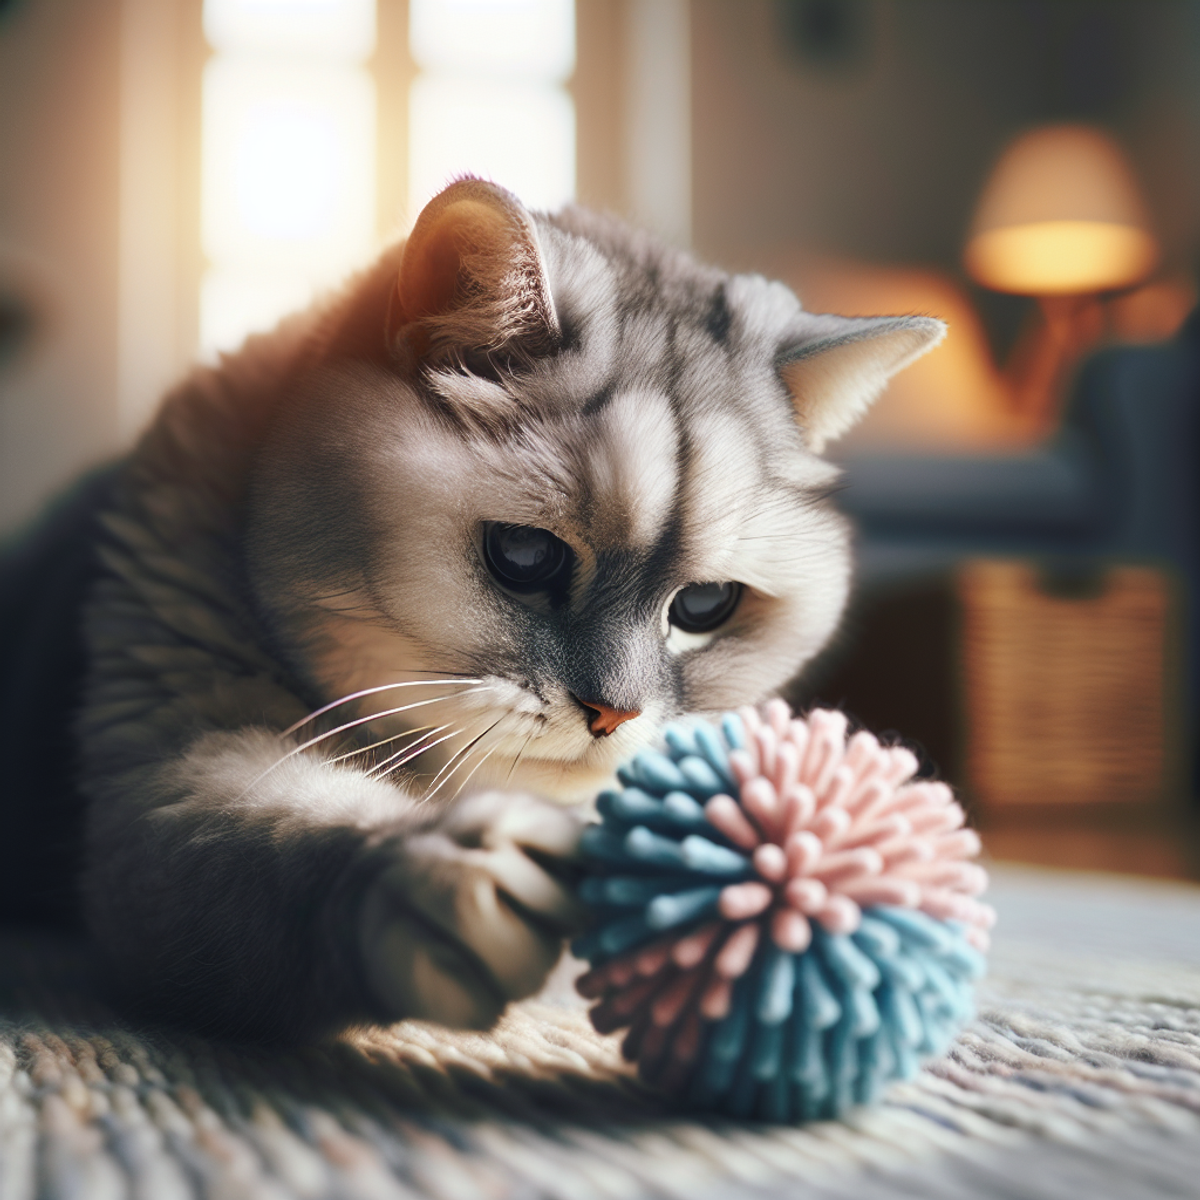 A senior gray cat with wise eyes playing with a soft pastel-colored ball toy in a warm and cozy home interior.